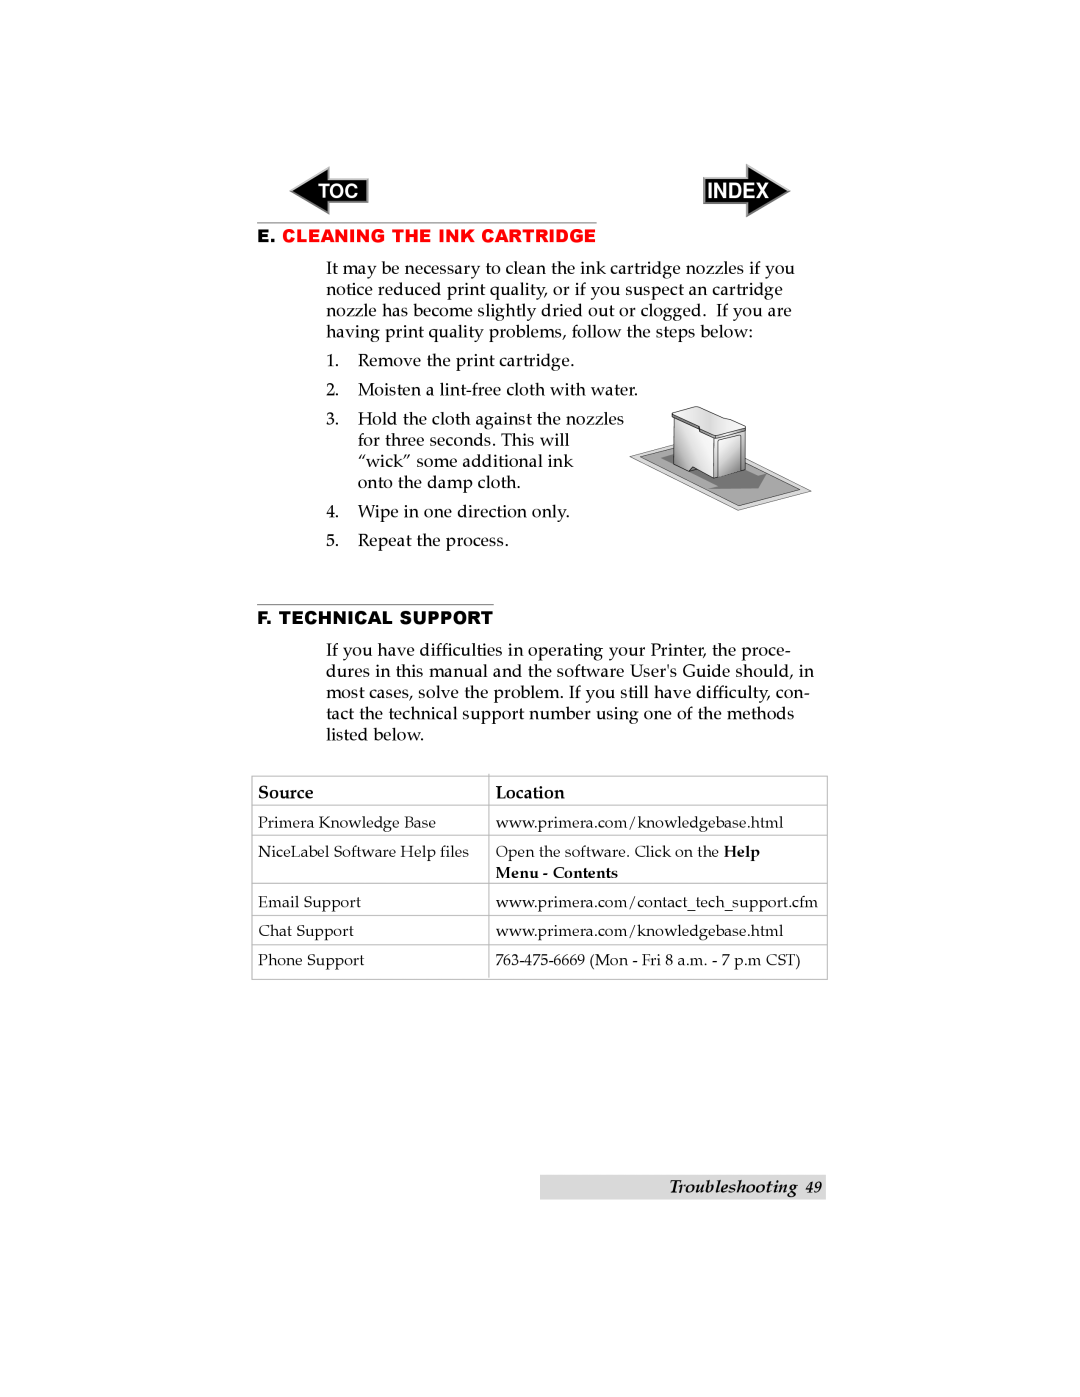 Primera Technology LX400 E. Cleaning The Ink Cartridge, F. Technical Support, Index, Source, Location, Troubleshooting 